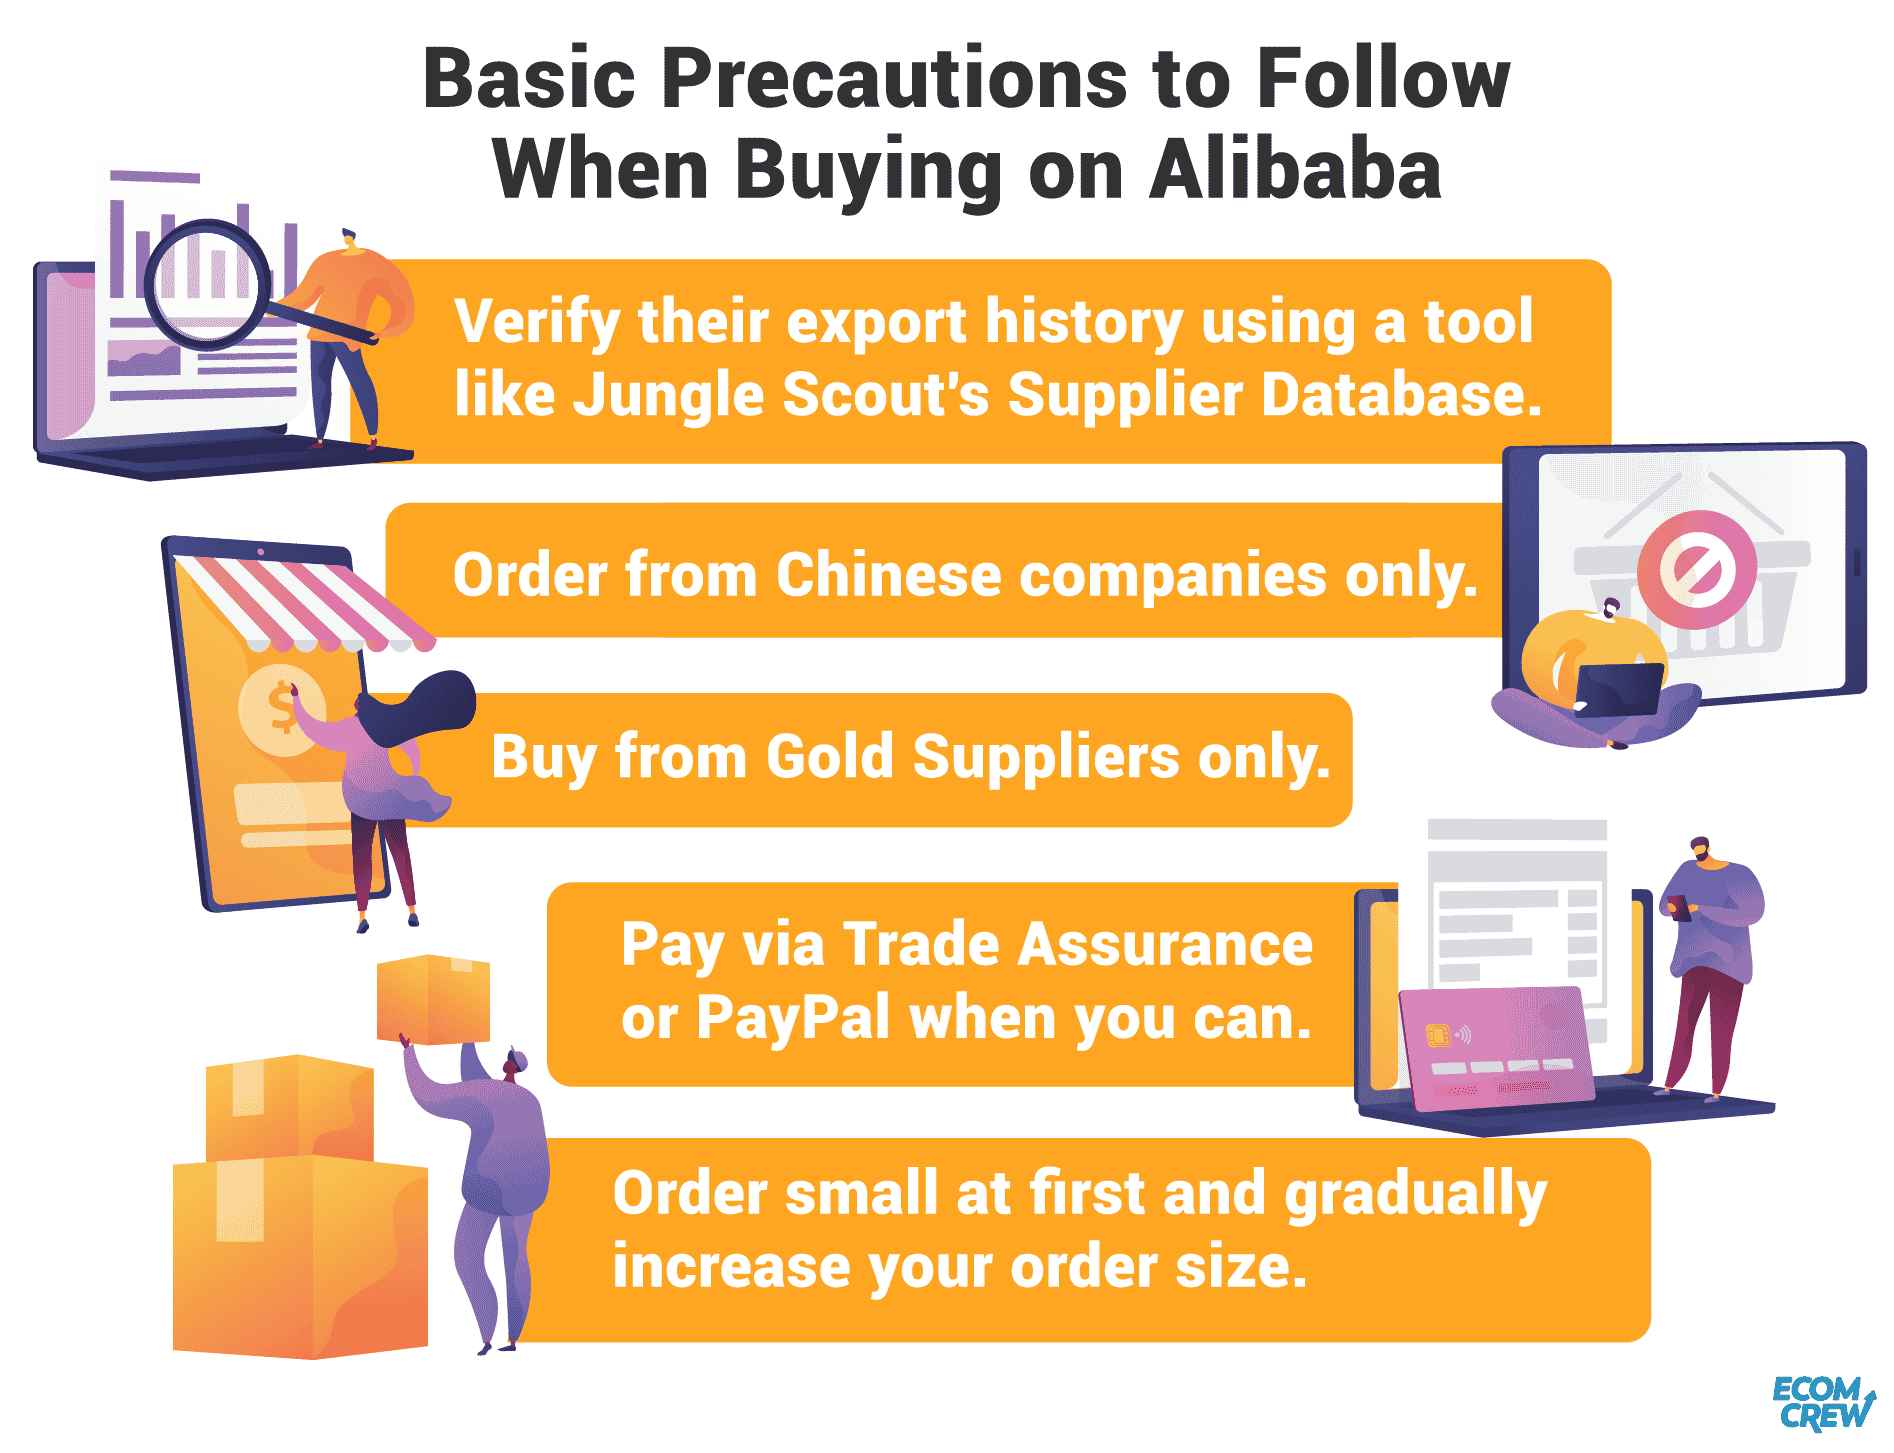 https://www.ecomcrew.com/wp-content/uploads/2022/01/IA_basic-precautions-to-follow-when-buying-on-Alibaba-01-1.png